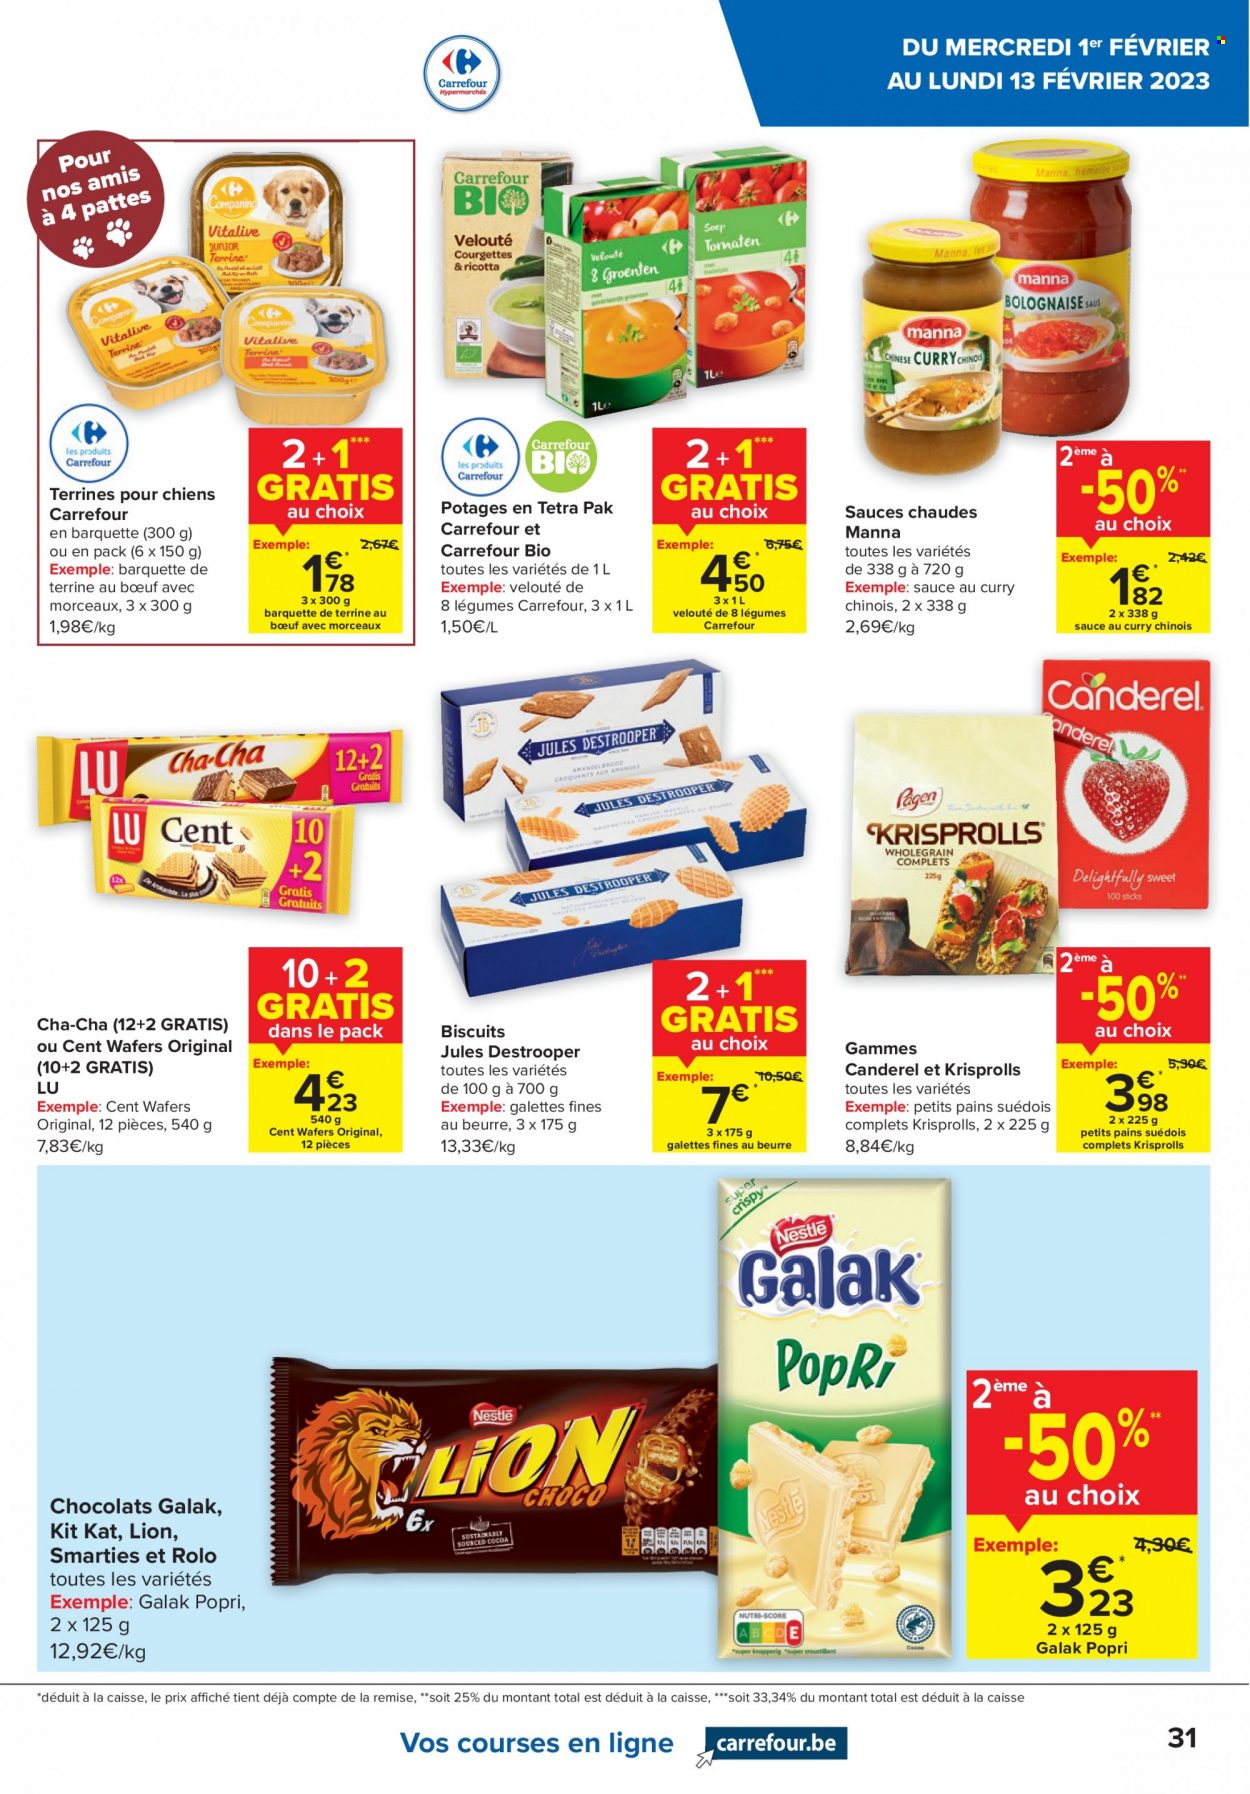 Catalogue Carrefour hypermarkt - 1.2.2023 - 13.2.2023. Page 31.